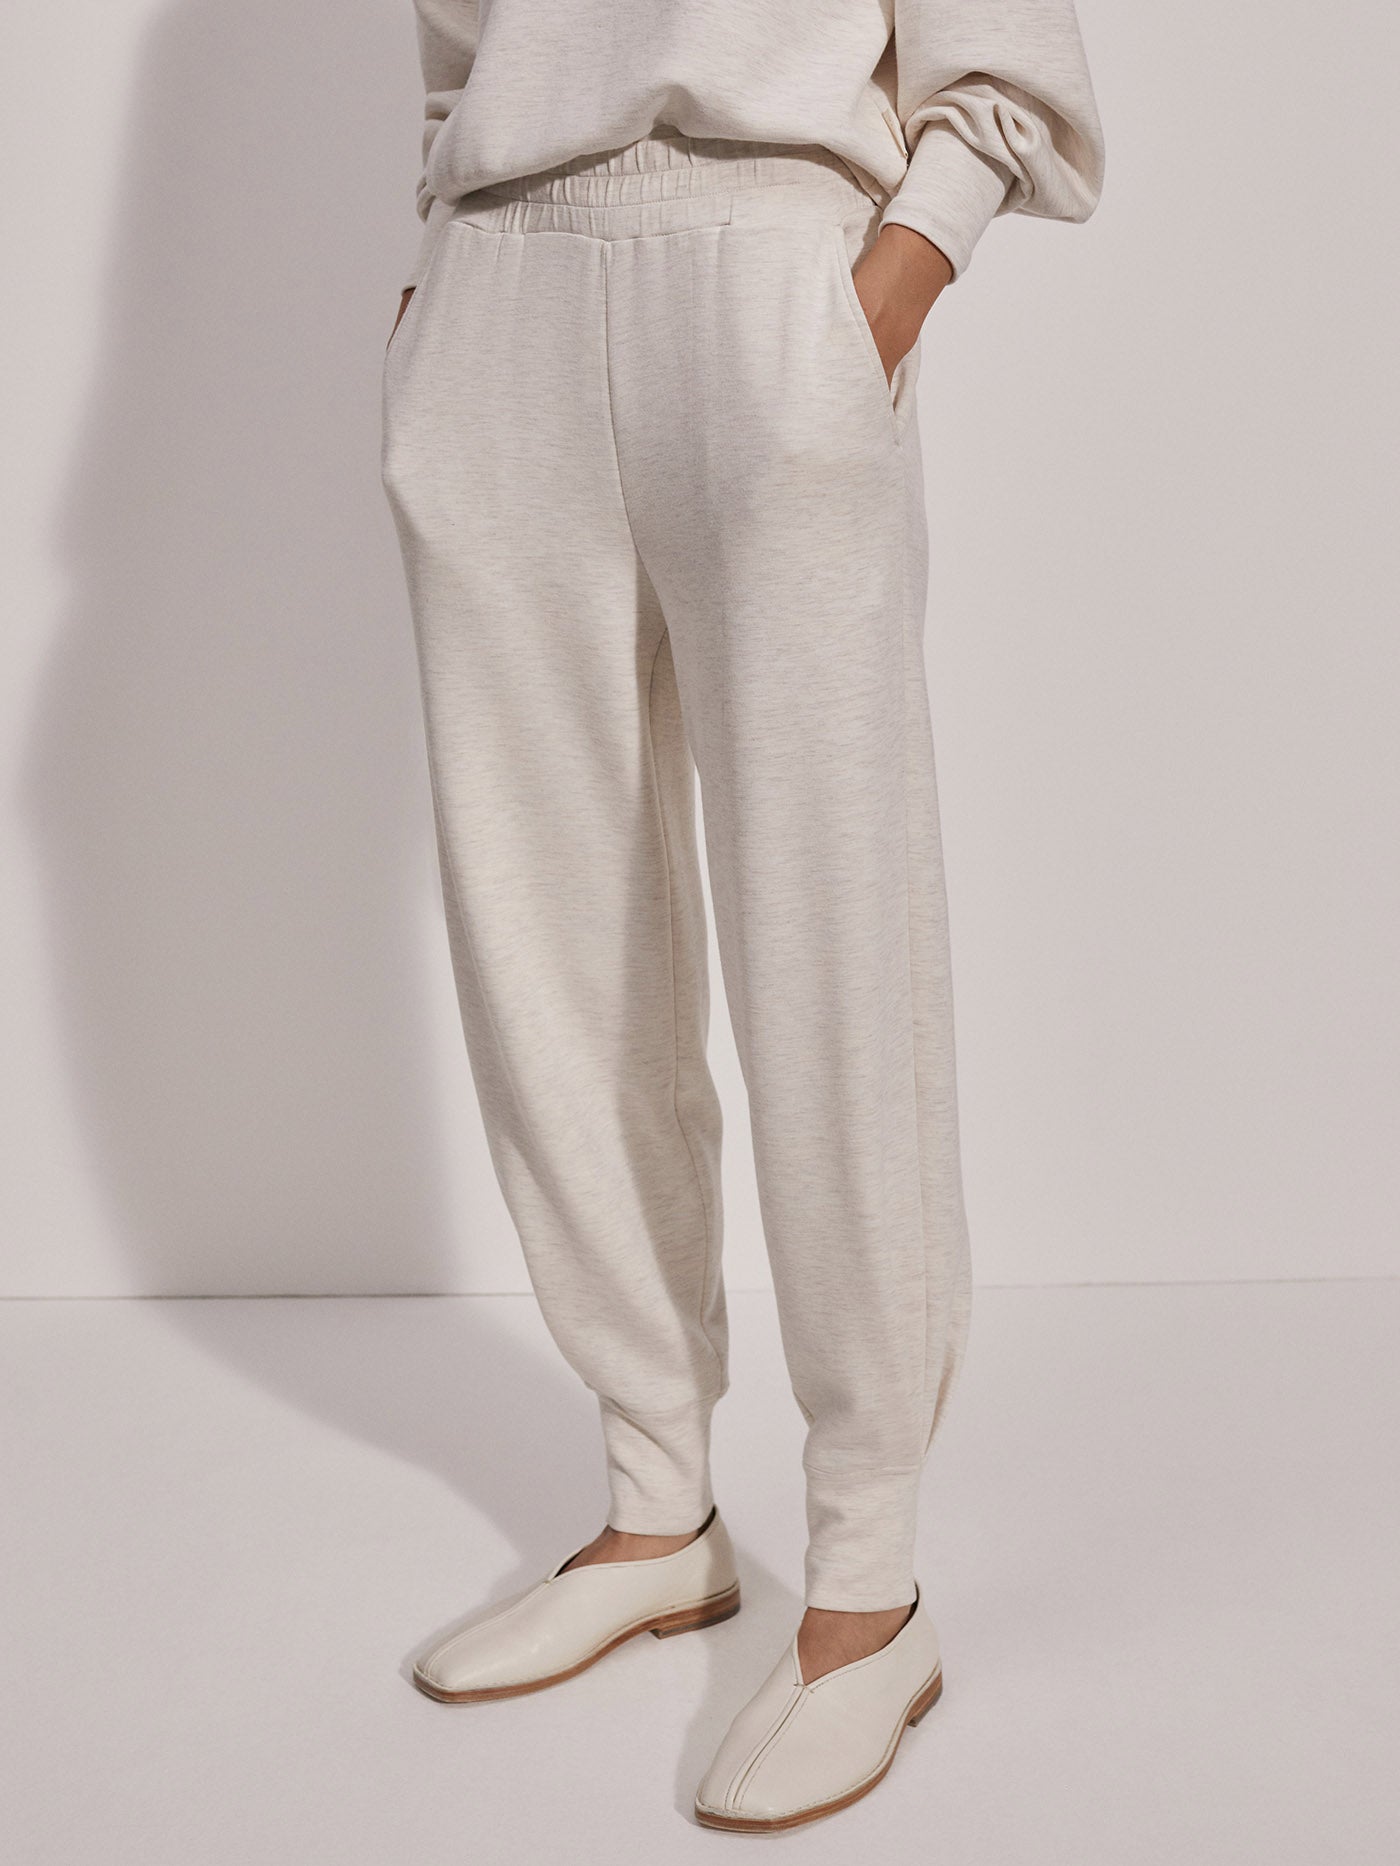 Women Striped Relaxed Flared Wrinkle Free Cotton Trousers - BITTERLIME